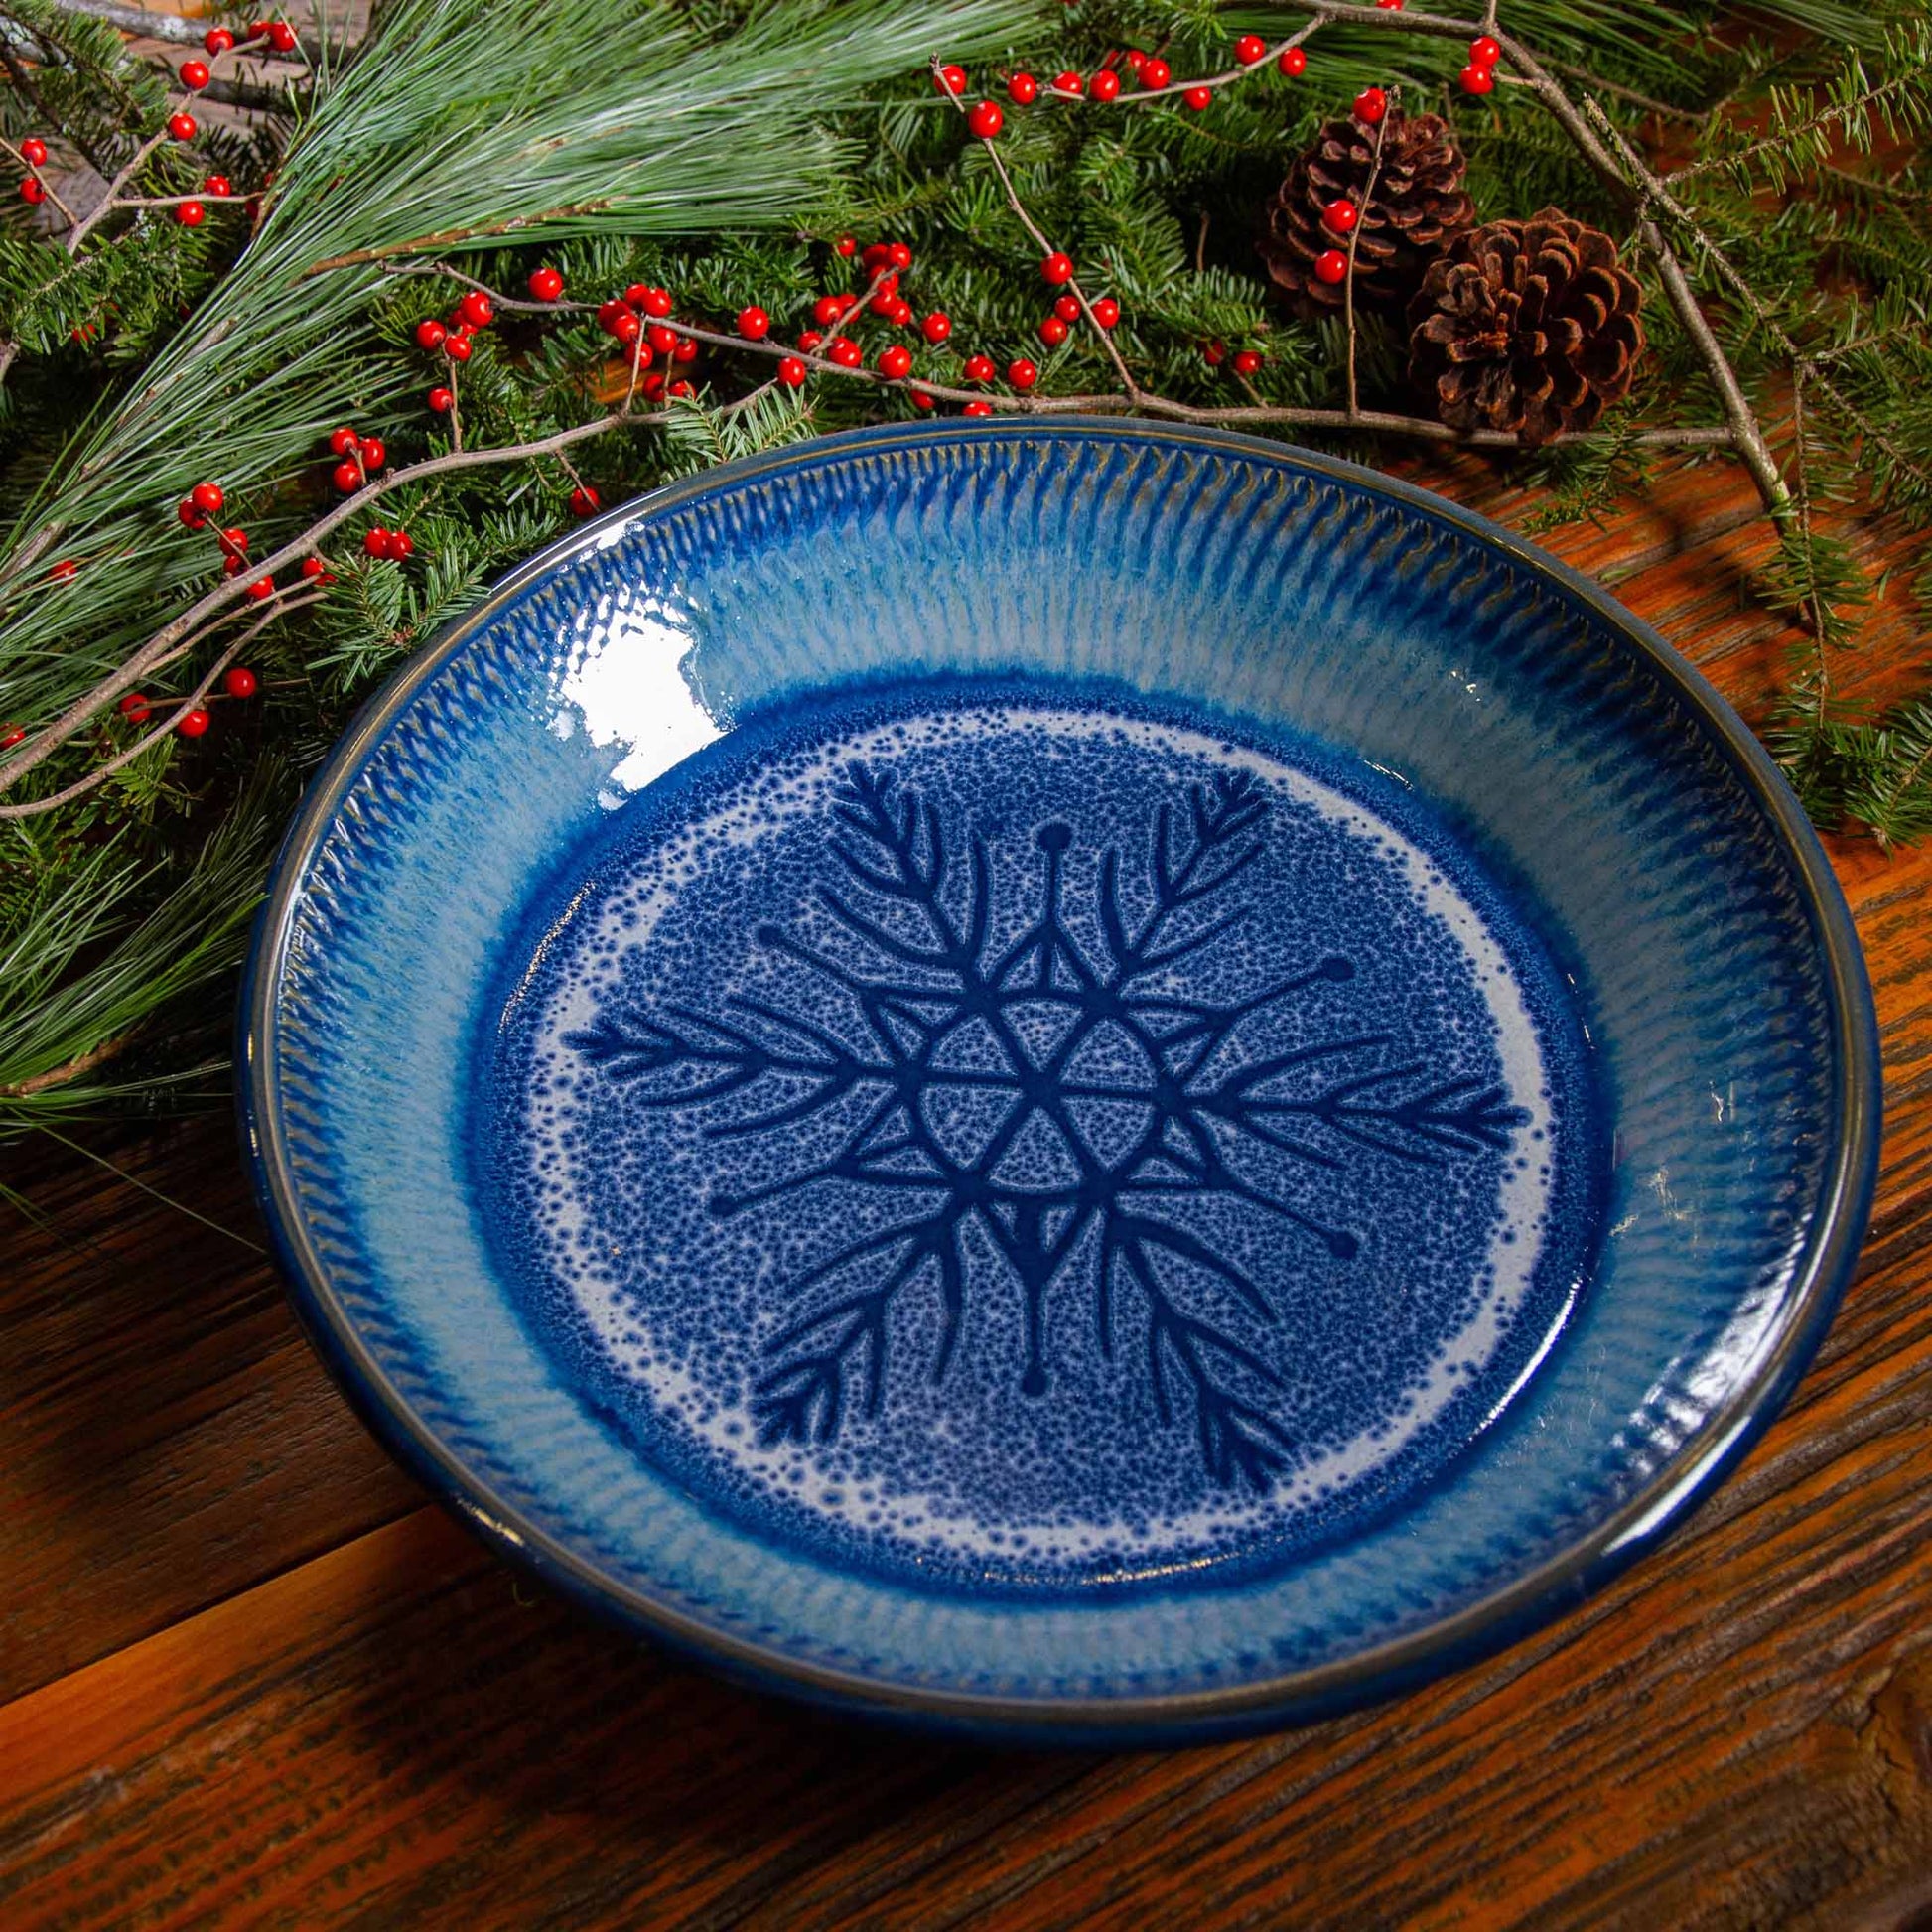 Harvest Bowl in Chattered Blue Snowflake